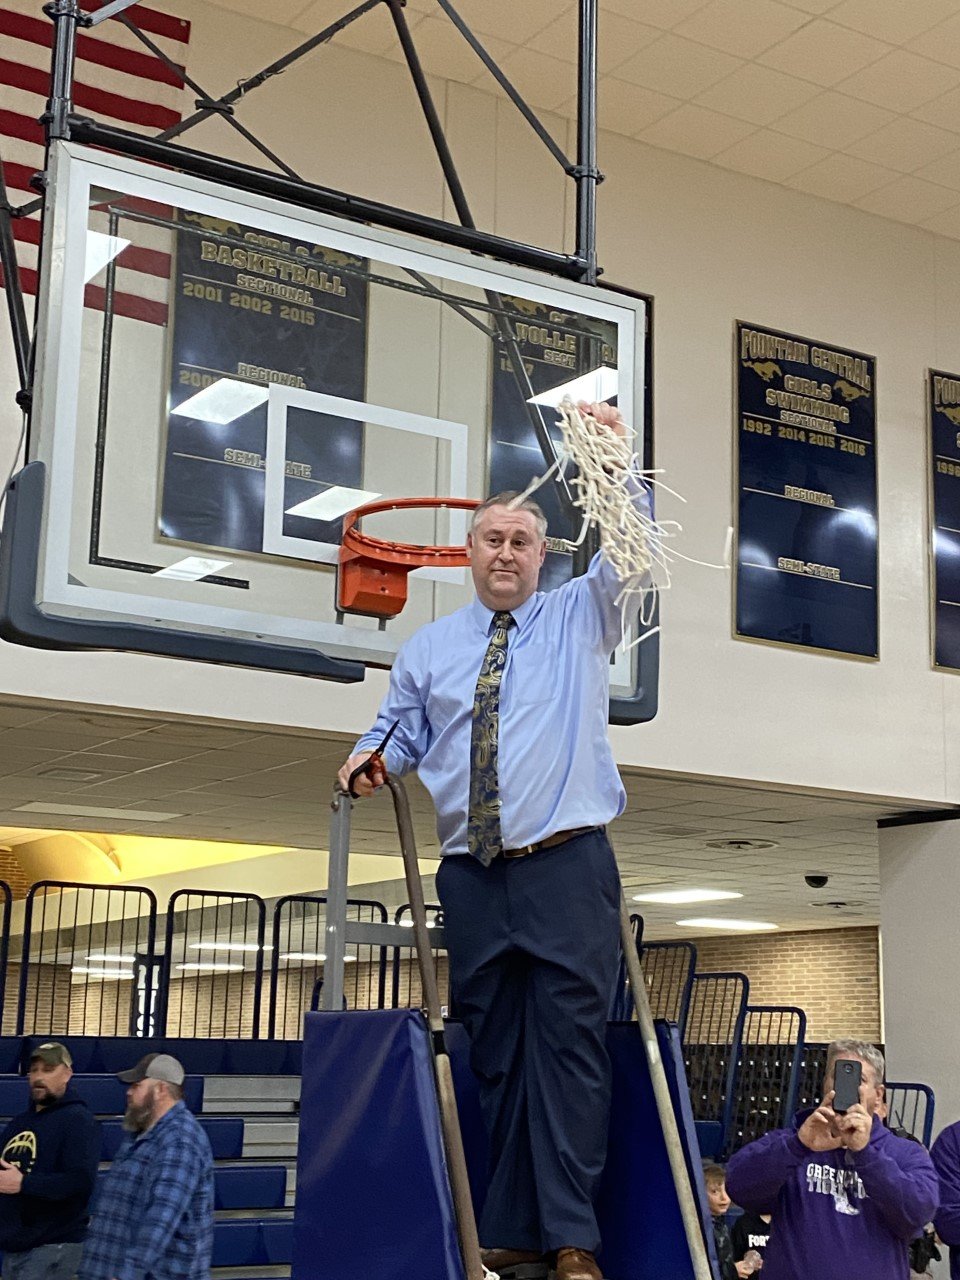 In just two seasons, Fountain Central boys basketball coach Greg Dean had led the Mustangs to a sectional championship. Dean has an overall record of 36-17 in his 1st two seasons with the Mustangs.